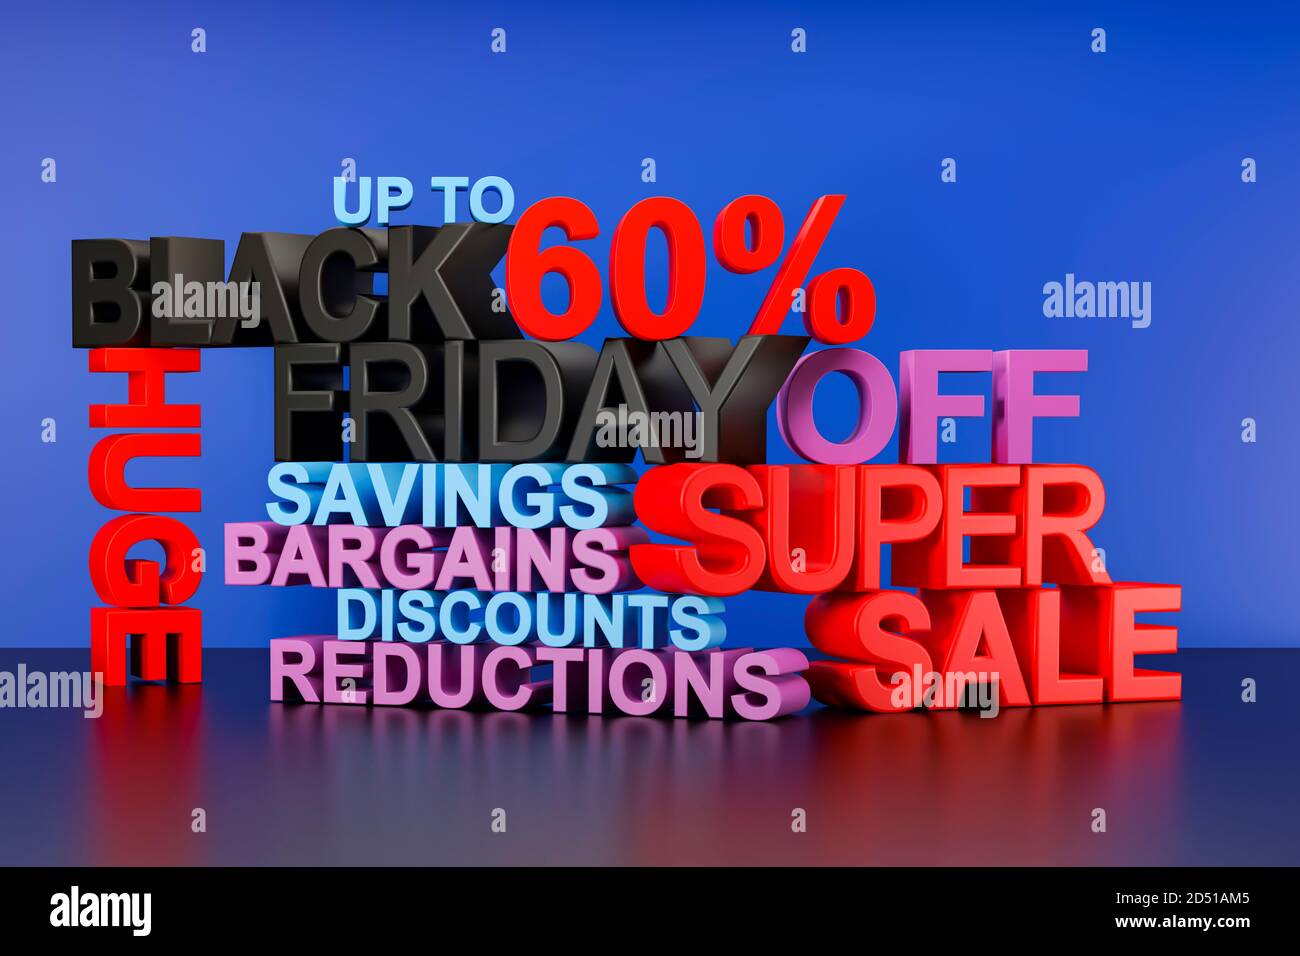 Black Friday super sale 3D text block background, poster or banner with words including black, friday, super, sale, huge, savings, bargains, discounts Stock Photo